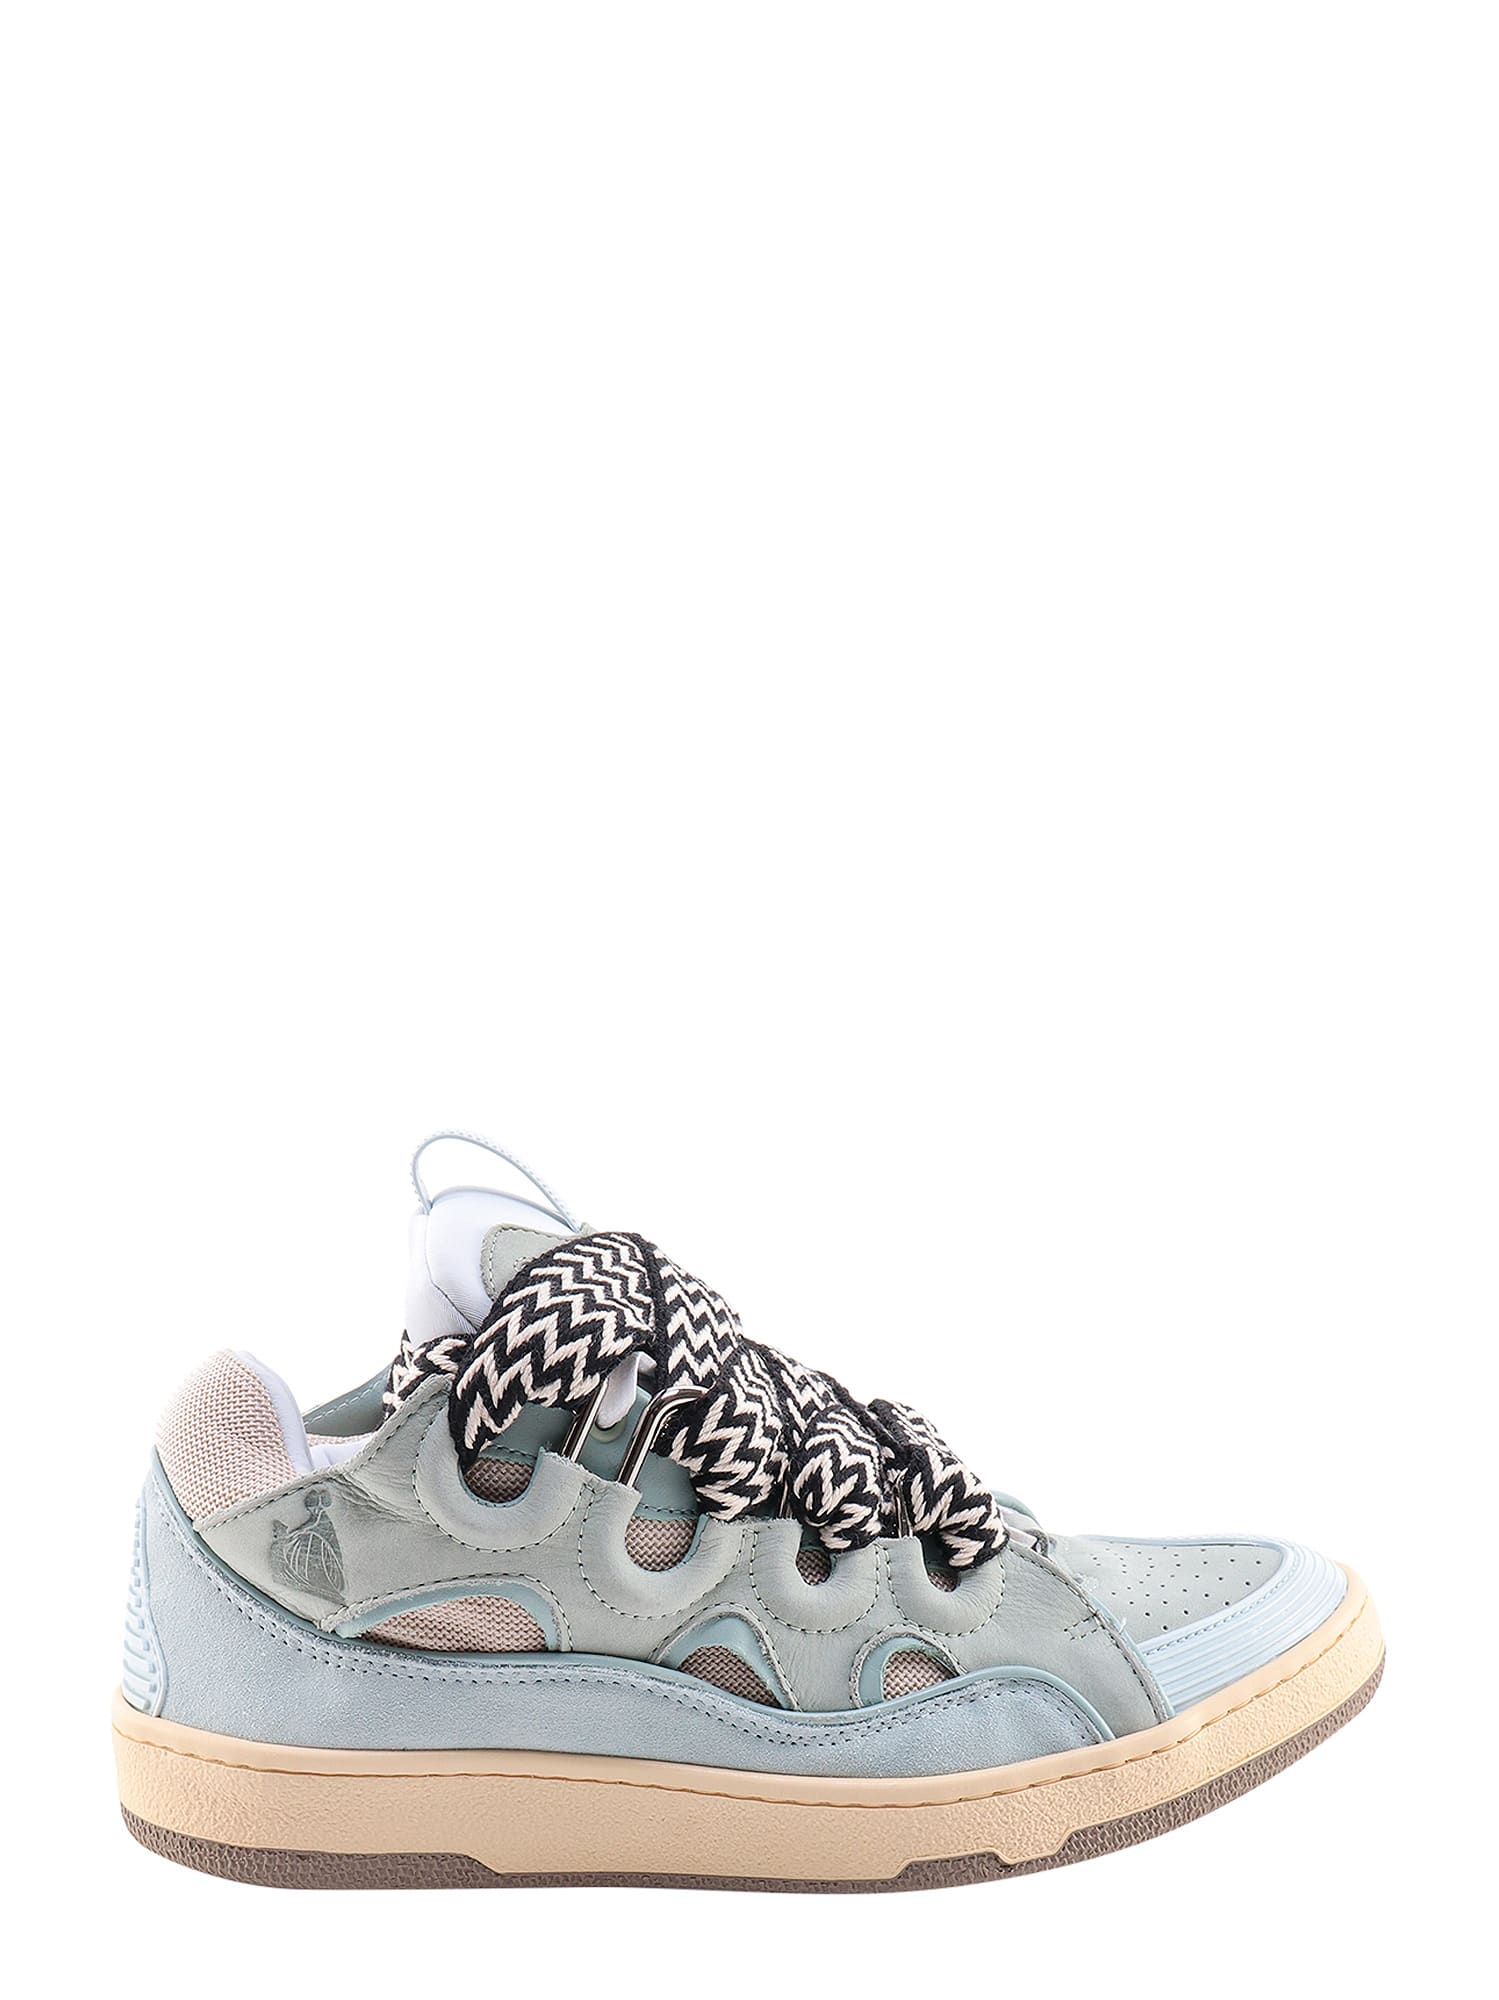 Lanvin Curb Sneakers In Blue